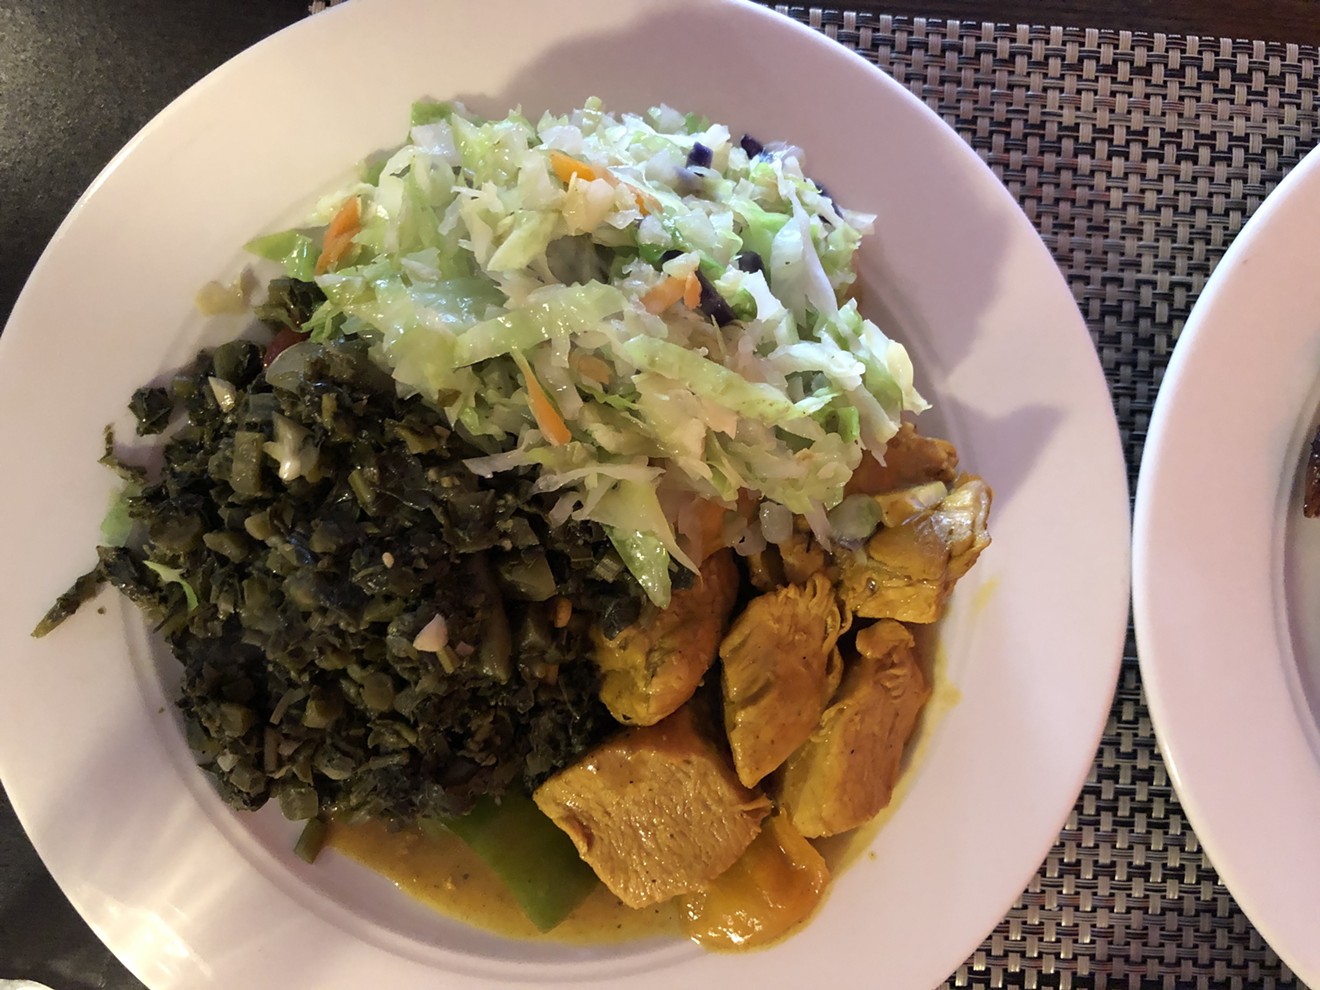 Curry chicken with callaloo and steamed shredded vegetables